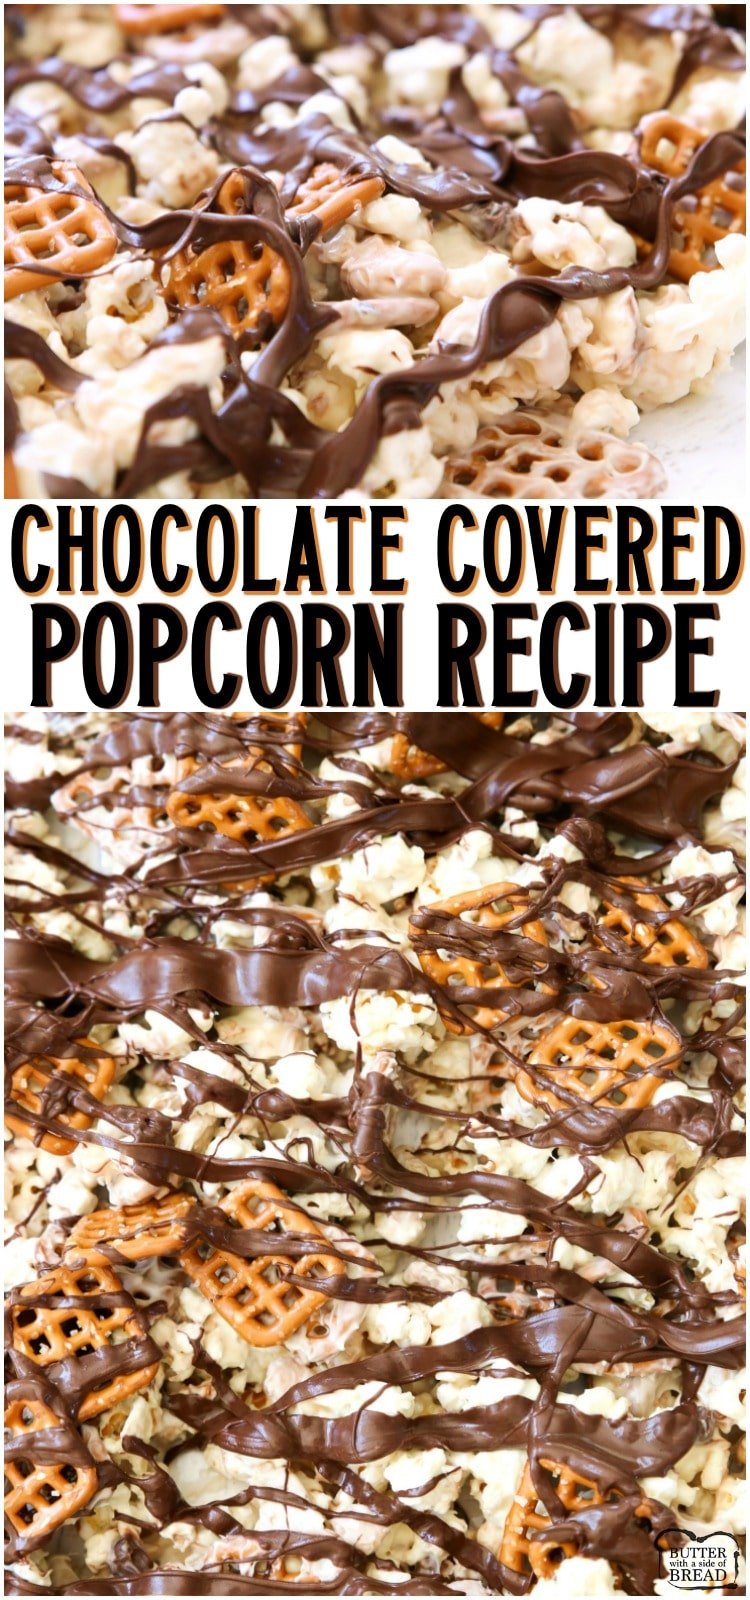 Chocolate Covered Popcorn made with white and semi sweet chocolate, pretzels and cashews! Our easy-to-make white chocolate popcorn recipe is the perfect blend of salty & sweet.